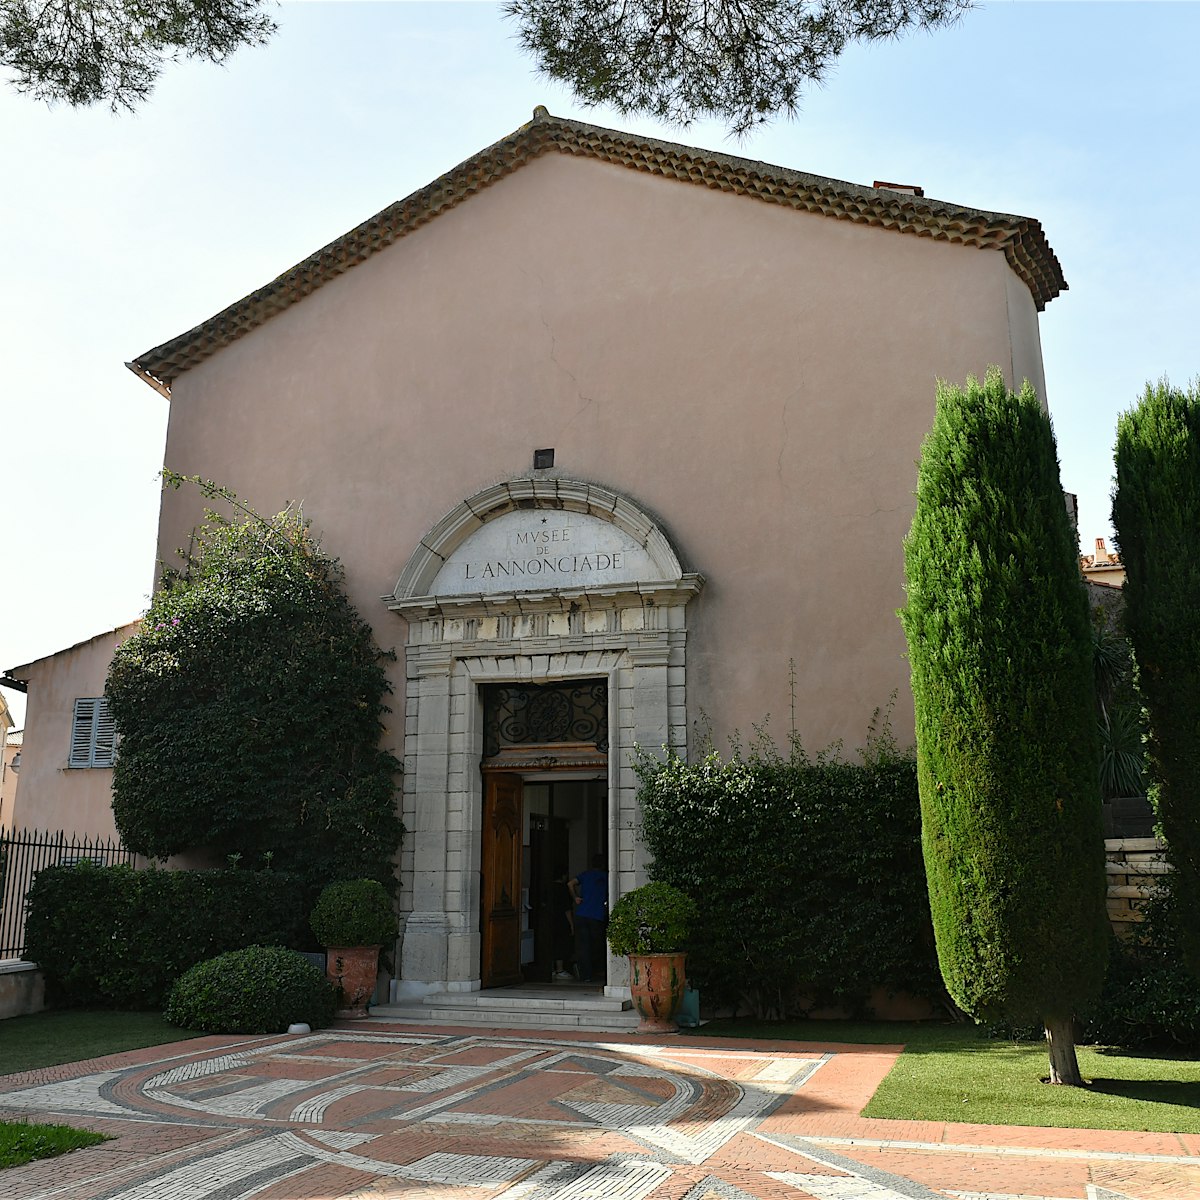 The Annonciade Museum in Saint-Tropez, France.